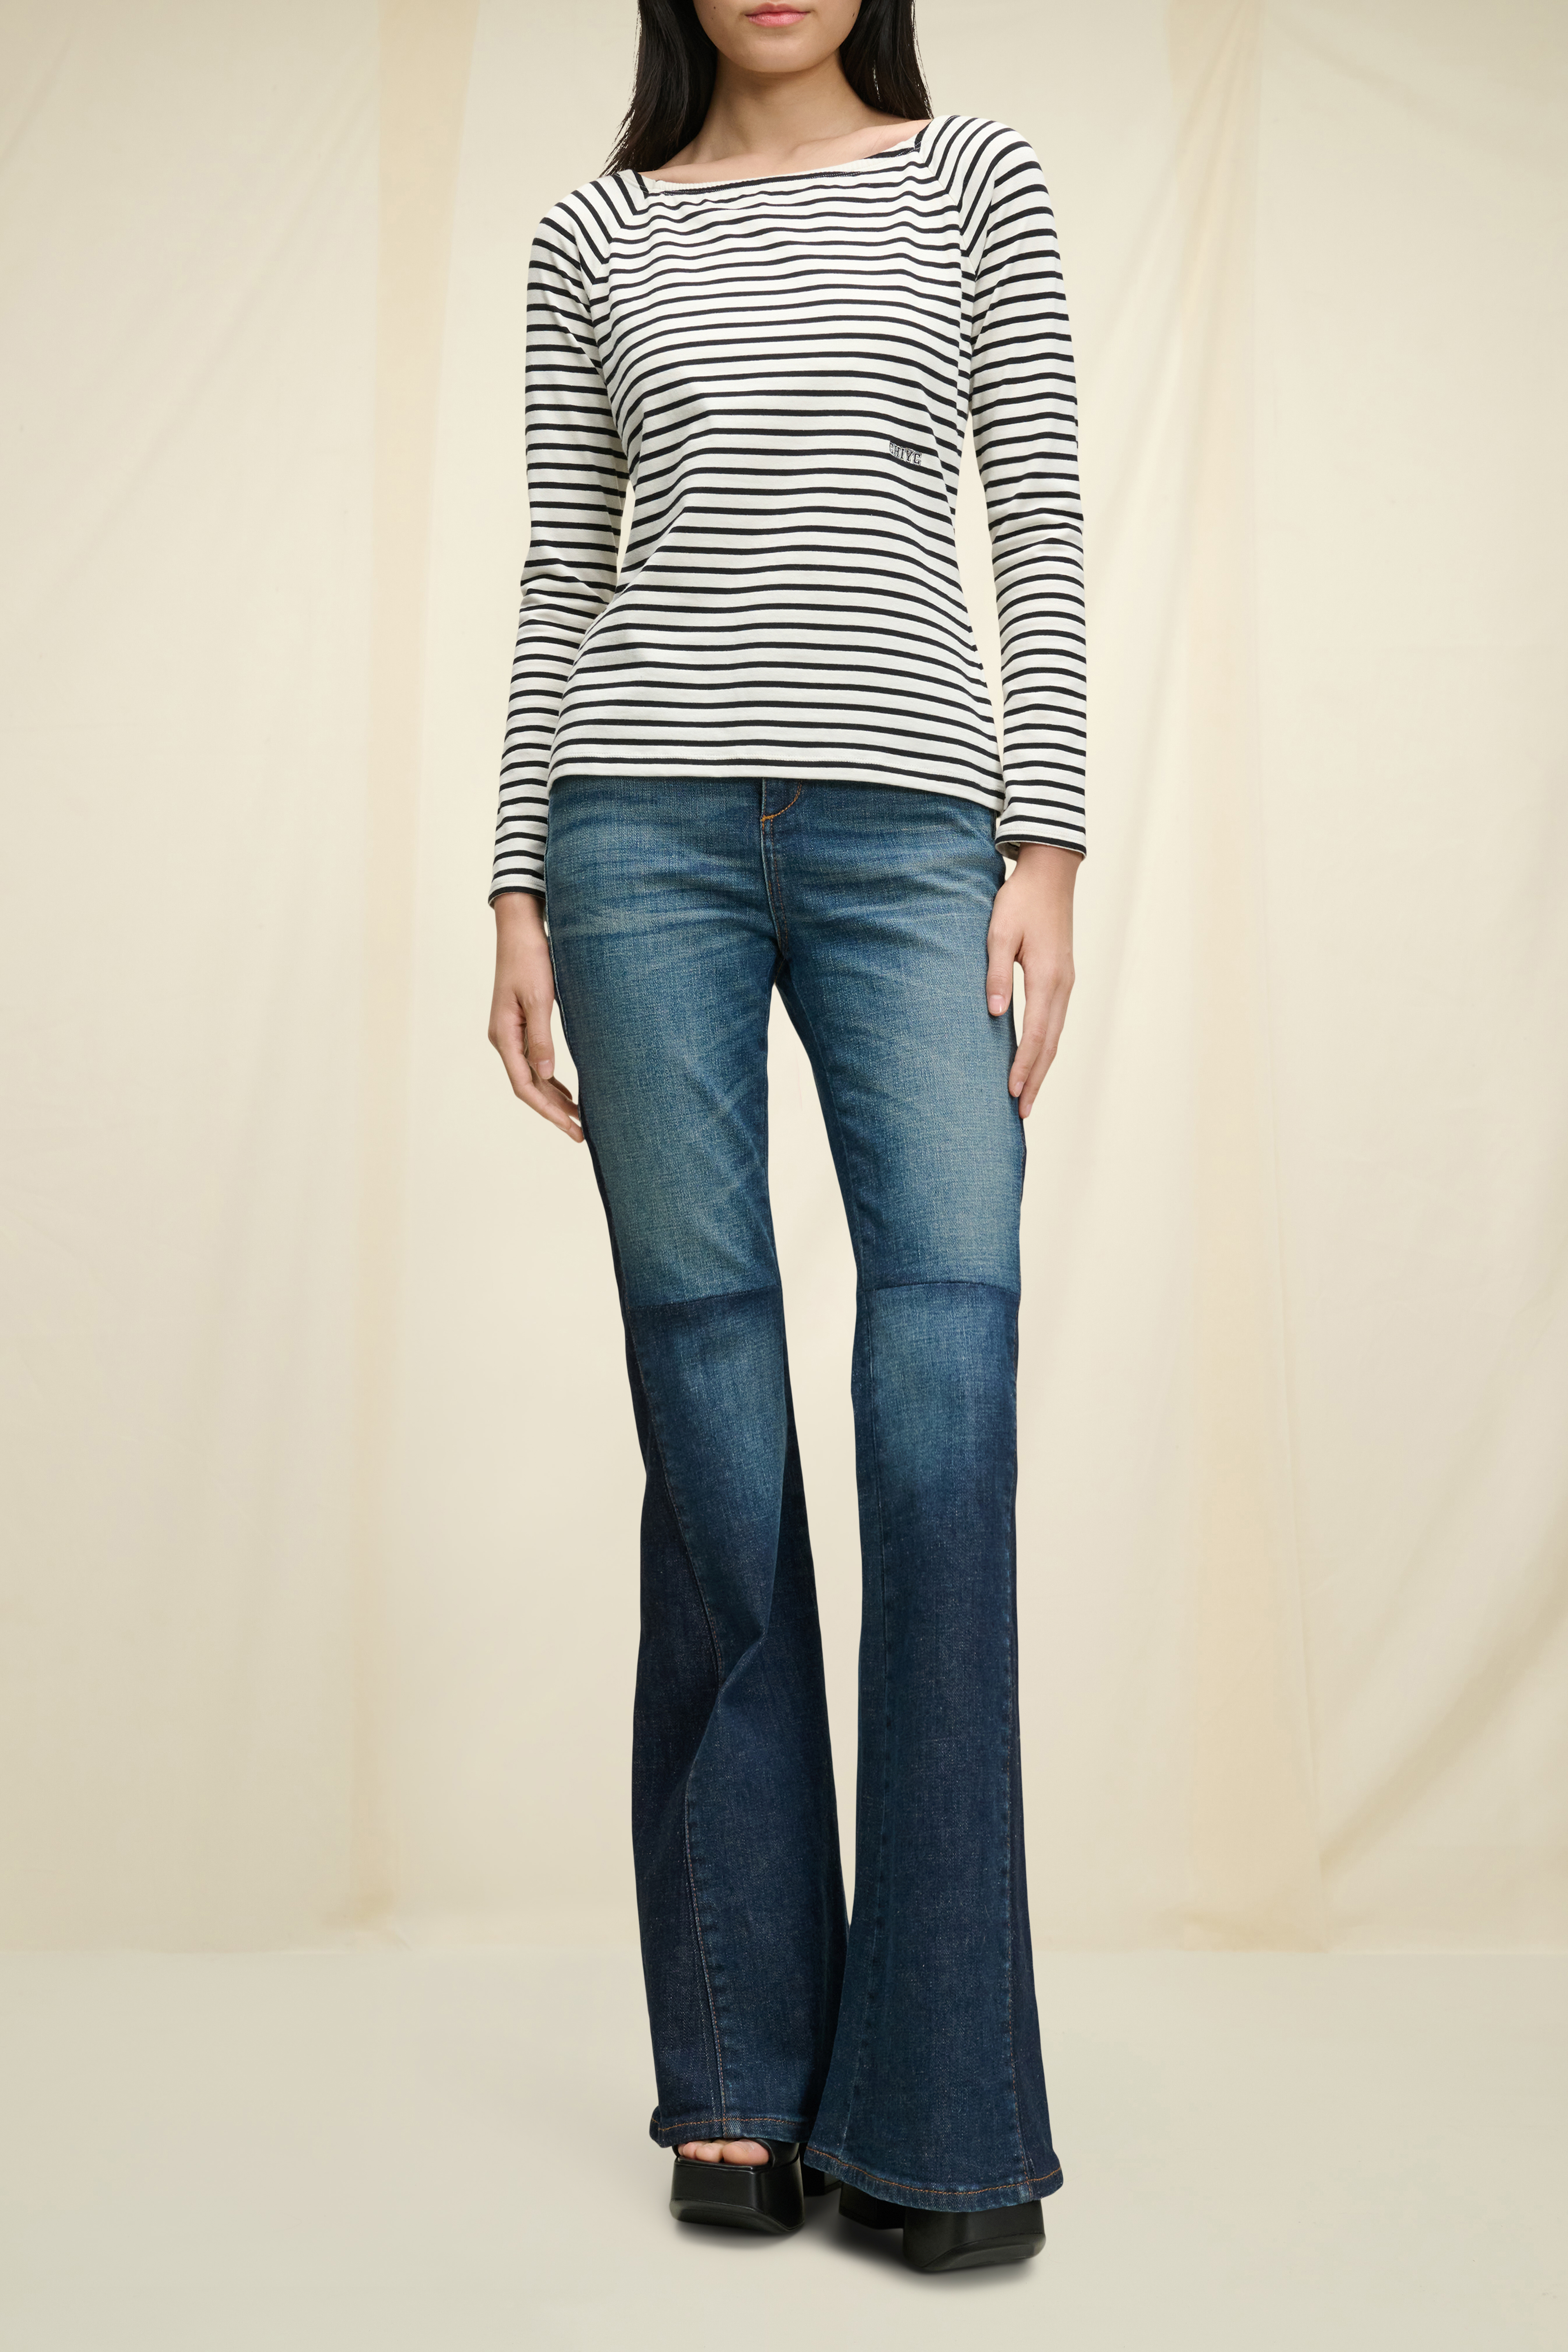 Dorothee Schumacher Embroidered striped top with a bateau